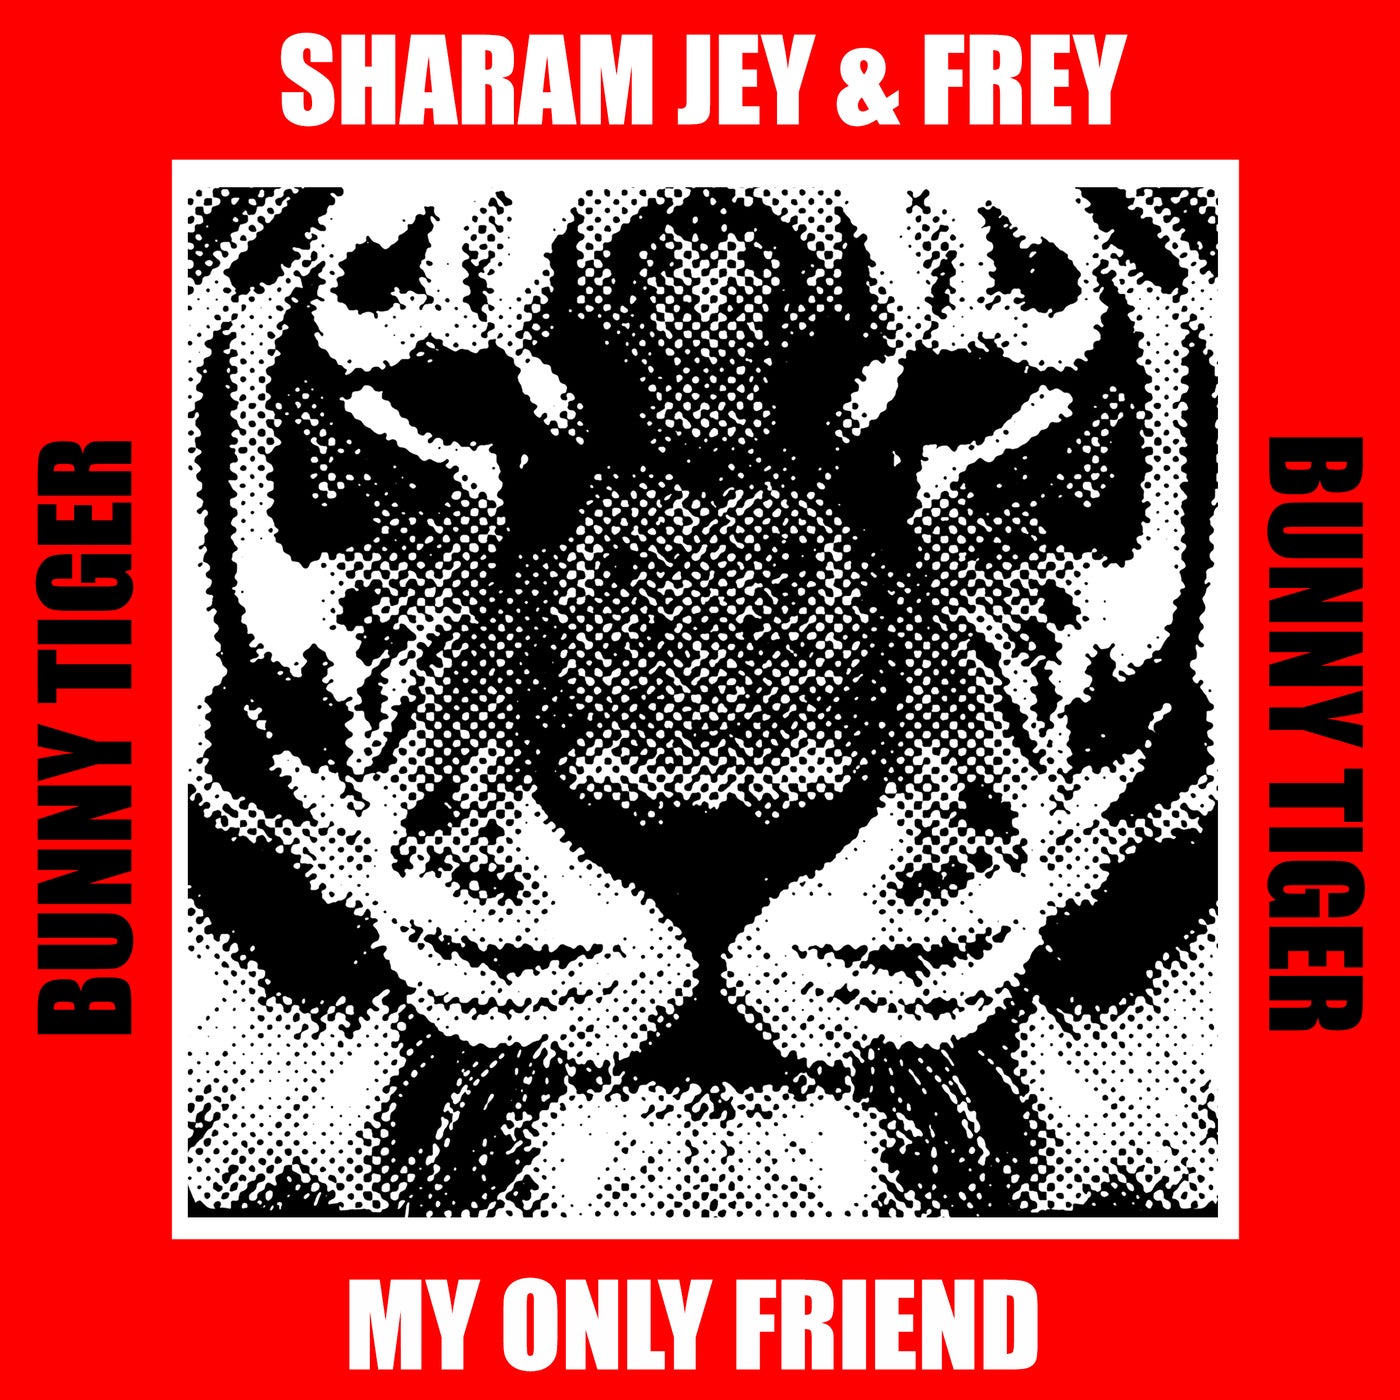 image cover: Sharam Jey, Frey - My Only Friend on Bunny Tiger